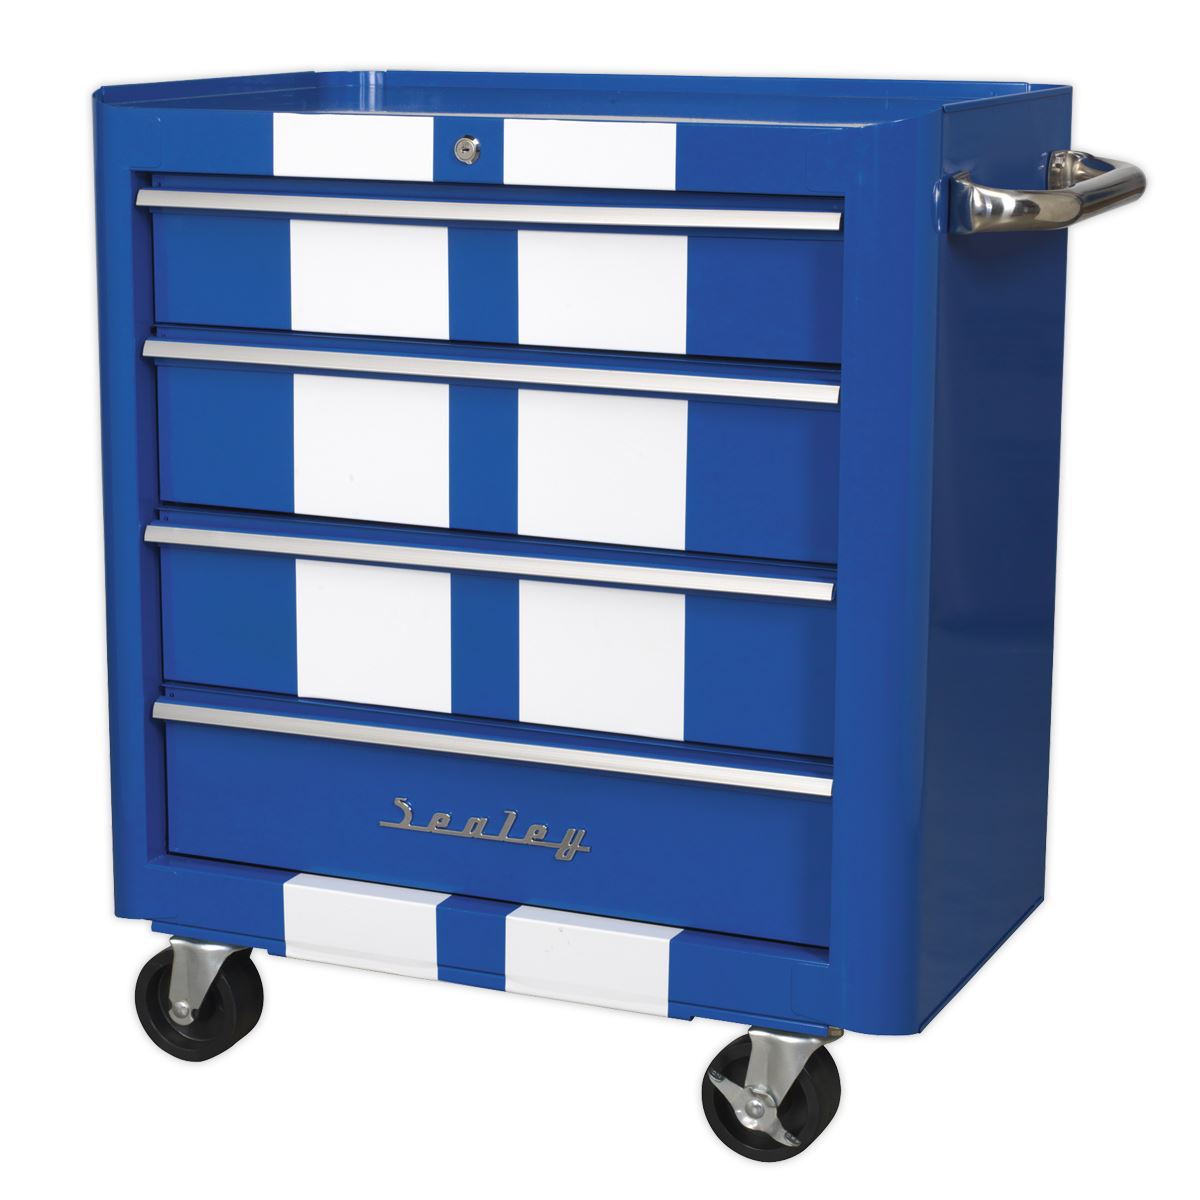 Sealey Premier Rollcab 4 Drawer Retro Style - Blue with White Stripes